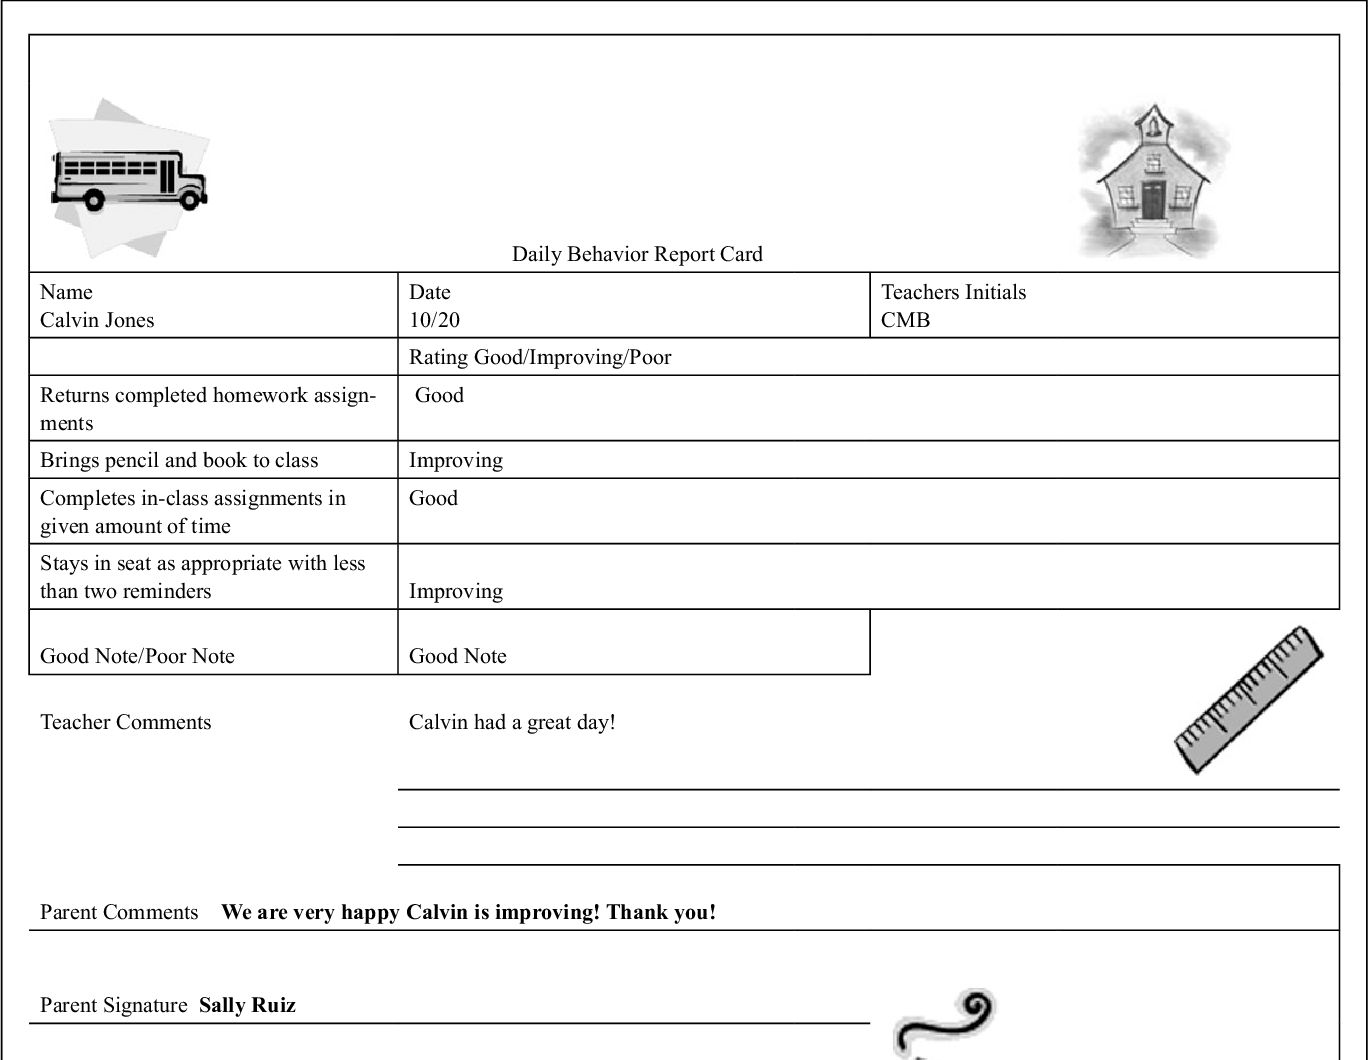 Pdf] Calvin Won't Sit Down! The Daily Behavior Report Card For Daily Report Card Template For Adhd